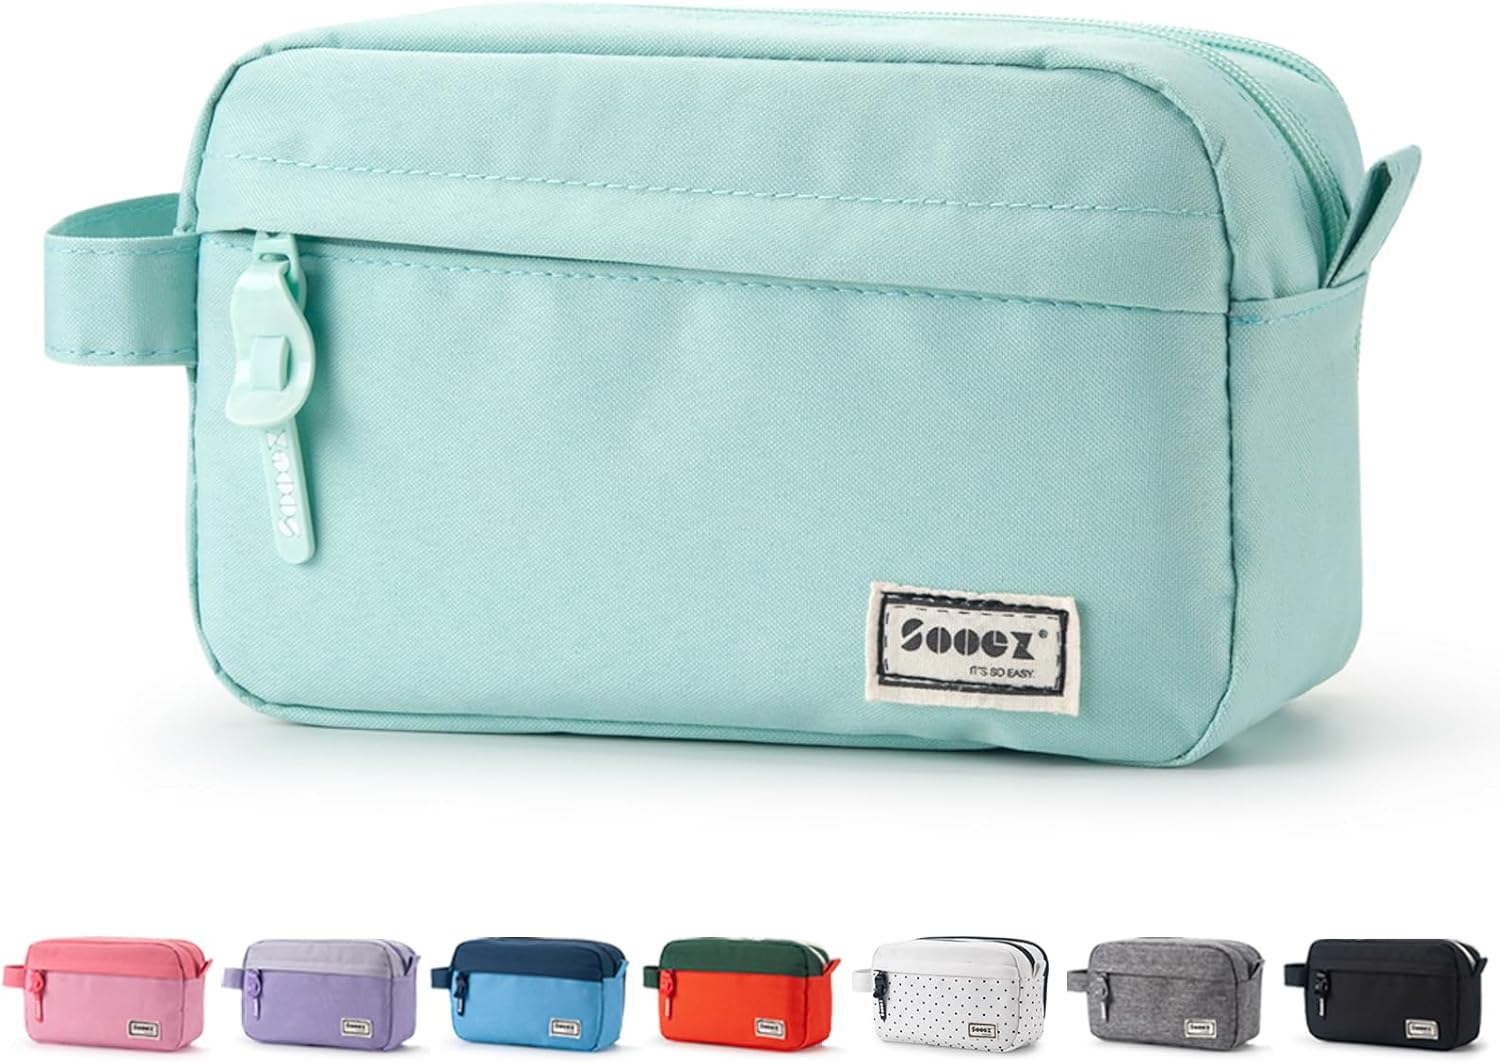 Sooez High Capacity Pencil Case, Big Pencil Bag Pouch Box Organizer Pen Case, Portable Journaling Supplies with Easy Grip Handle & Loop, Asthetic Supply for Girls Adults, Mint Green